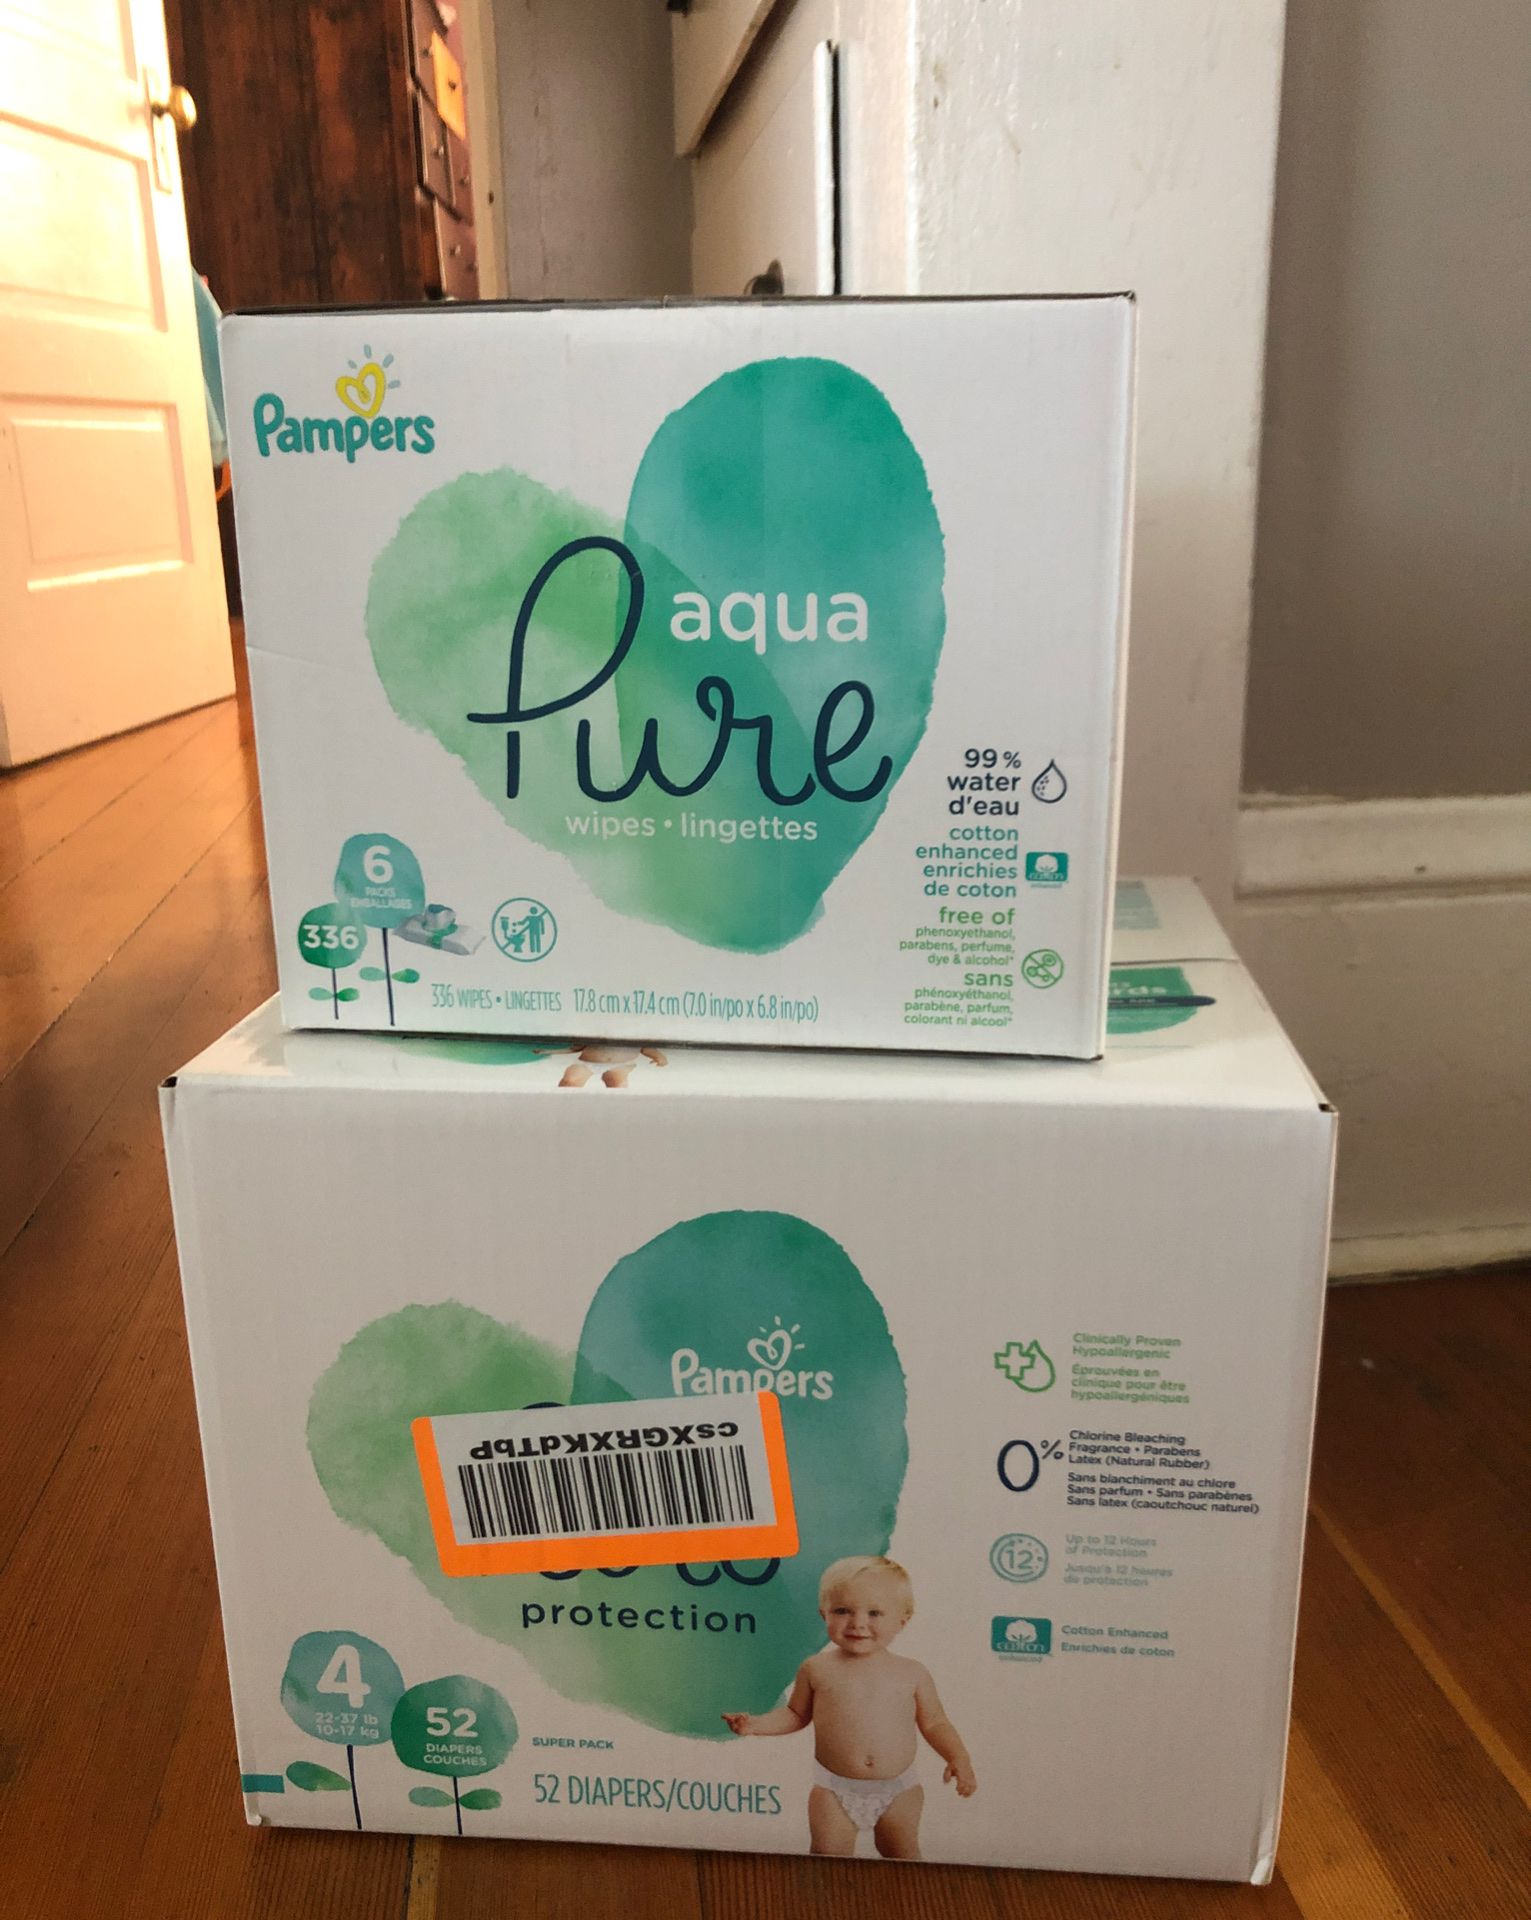 Pampers Pure size 4 + wipes